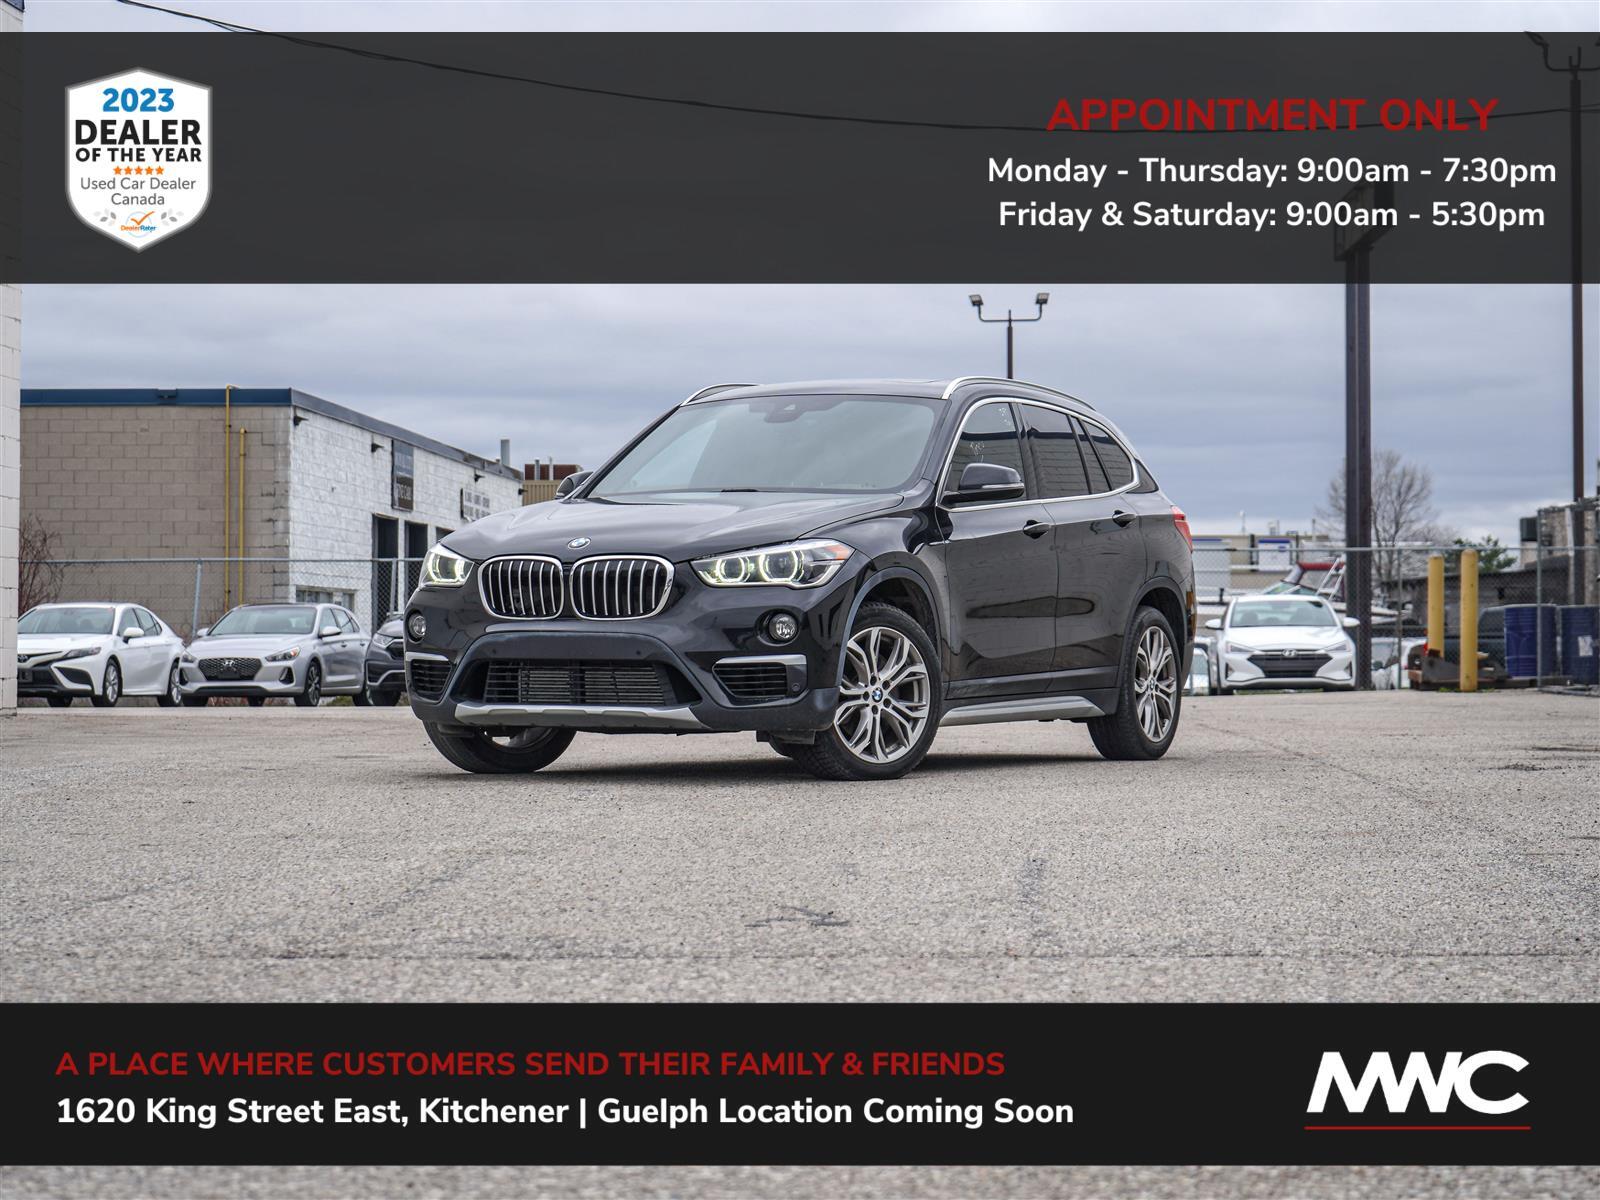 2019 BMW X1 XDRIVE28I | NAVIGATION | IN GUELPH, BY APPT. ONLY